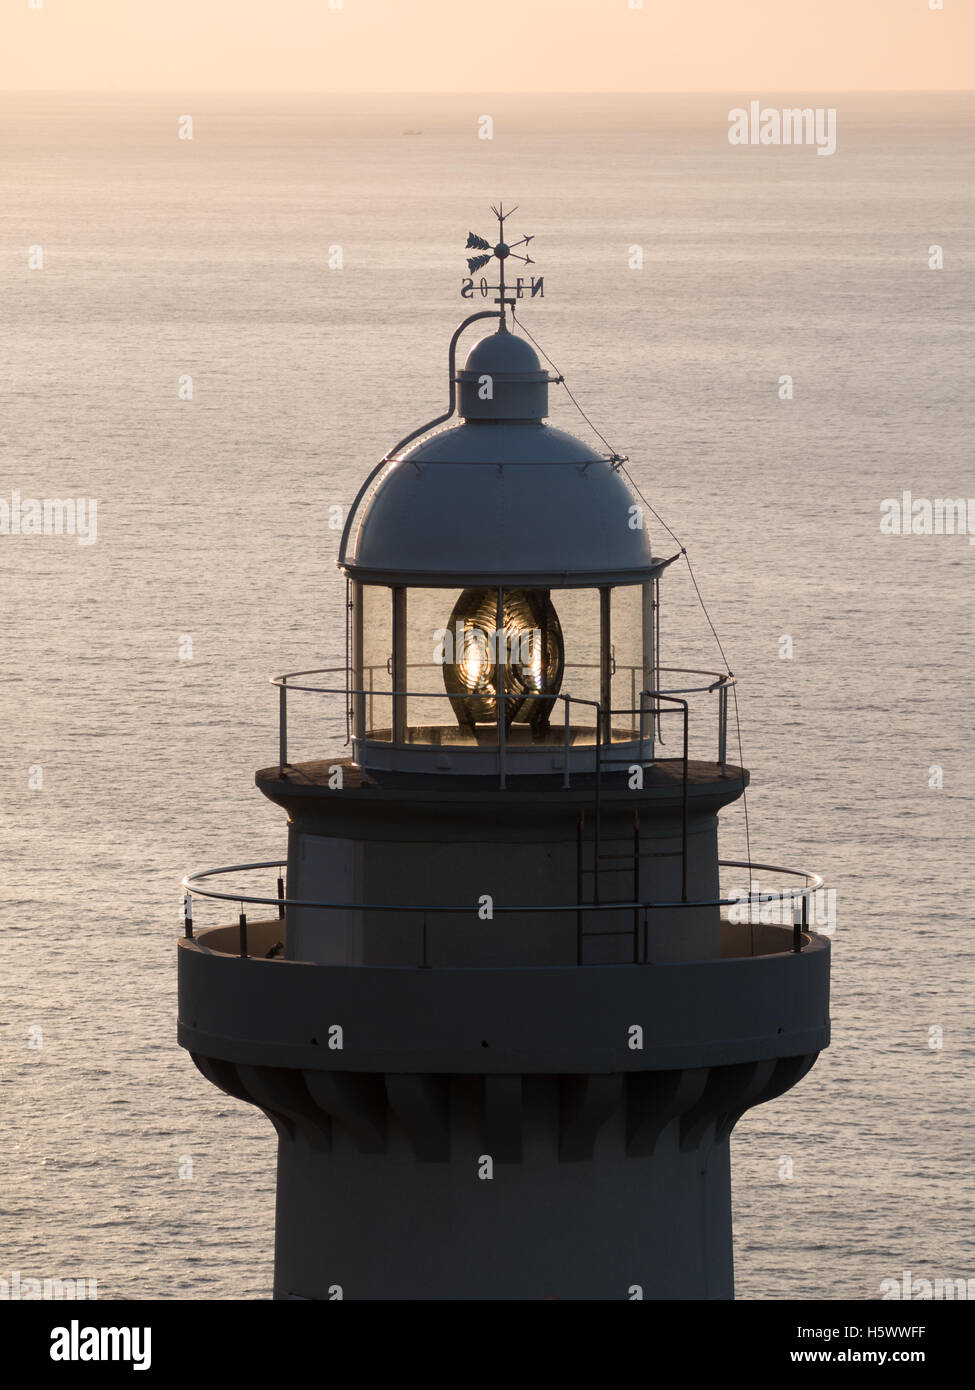 Lighthouse lantern with sea in background Stock Photo